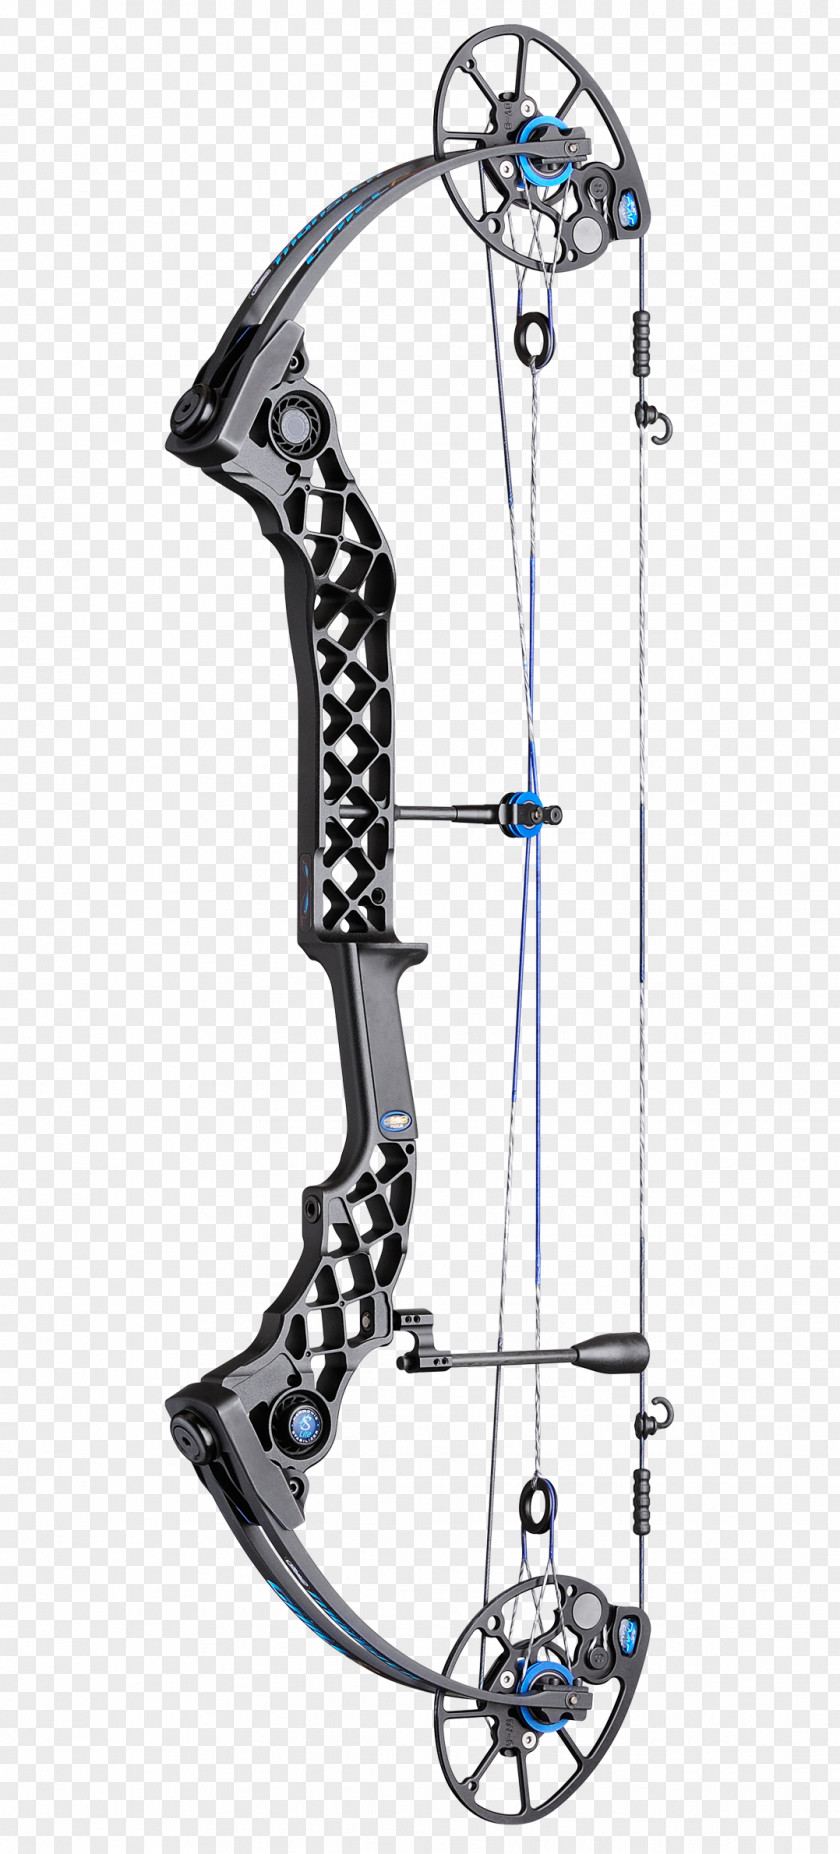 R60 Compound Bows PSE Archery Bow And Arrow Hunting PNG